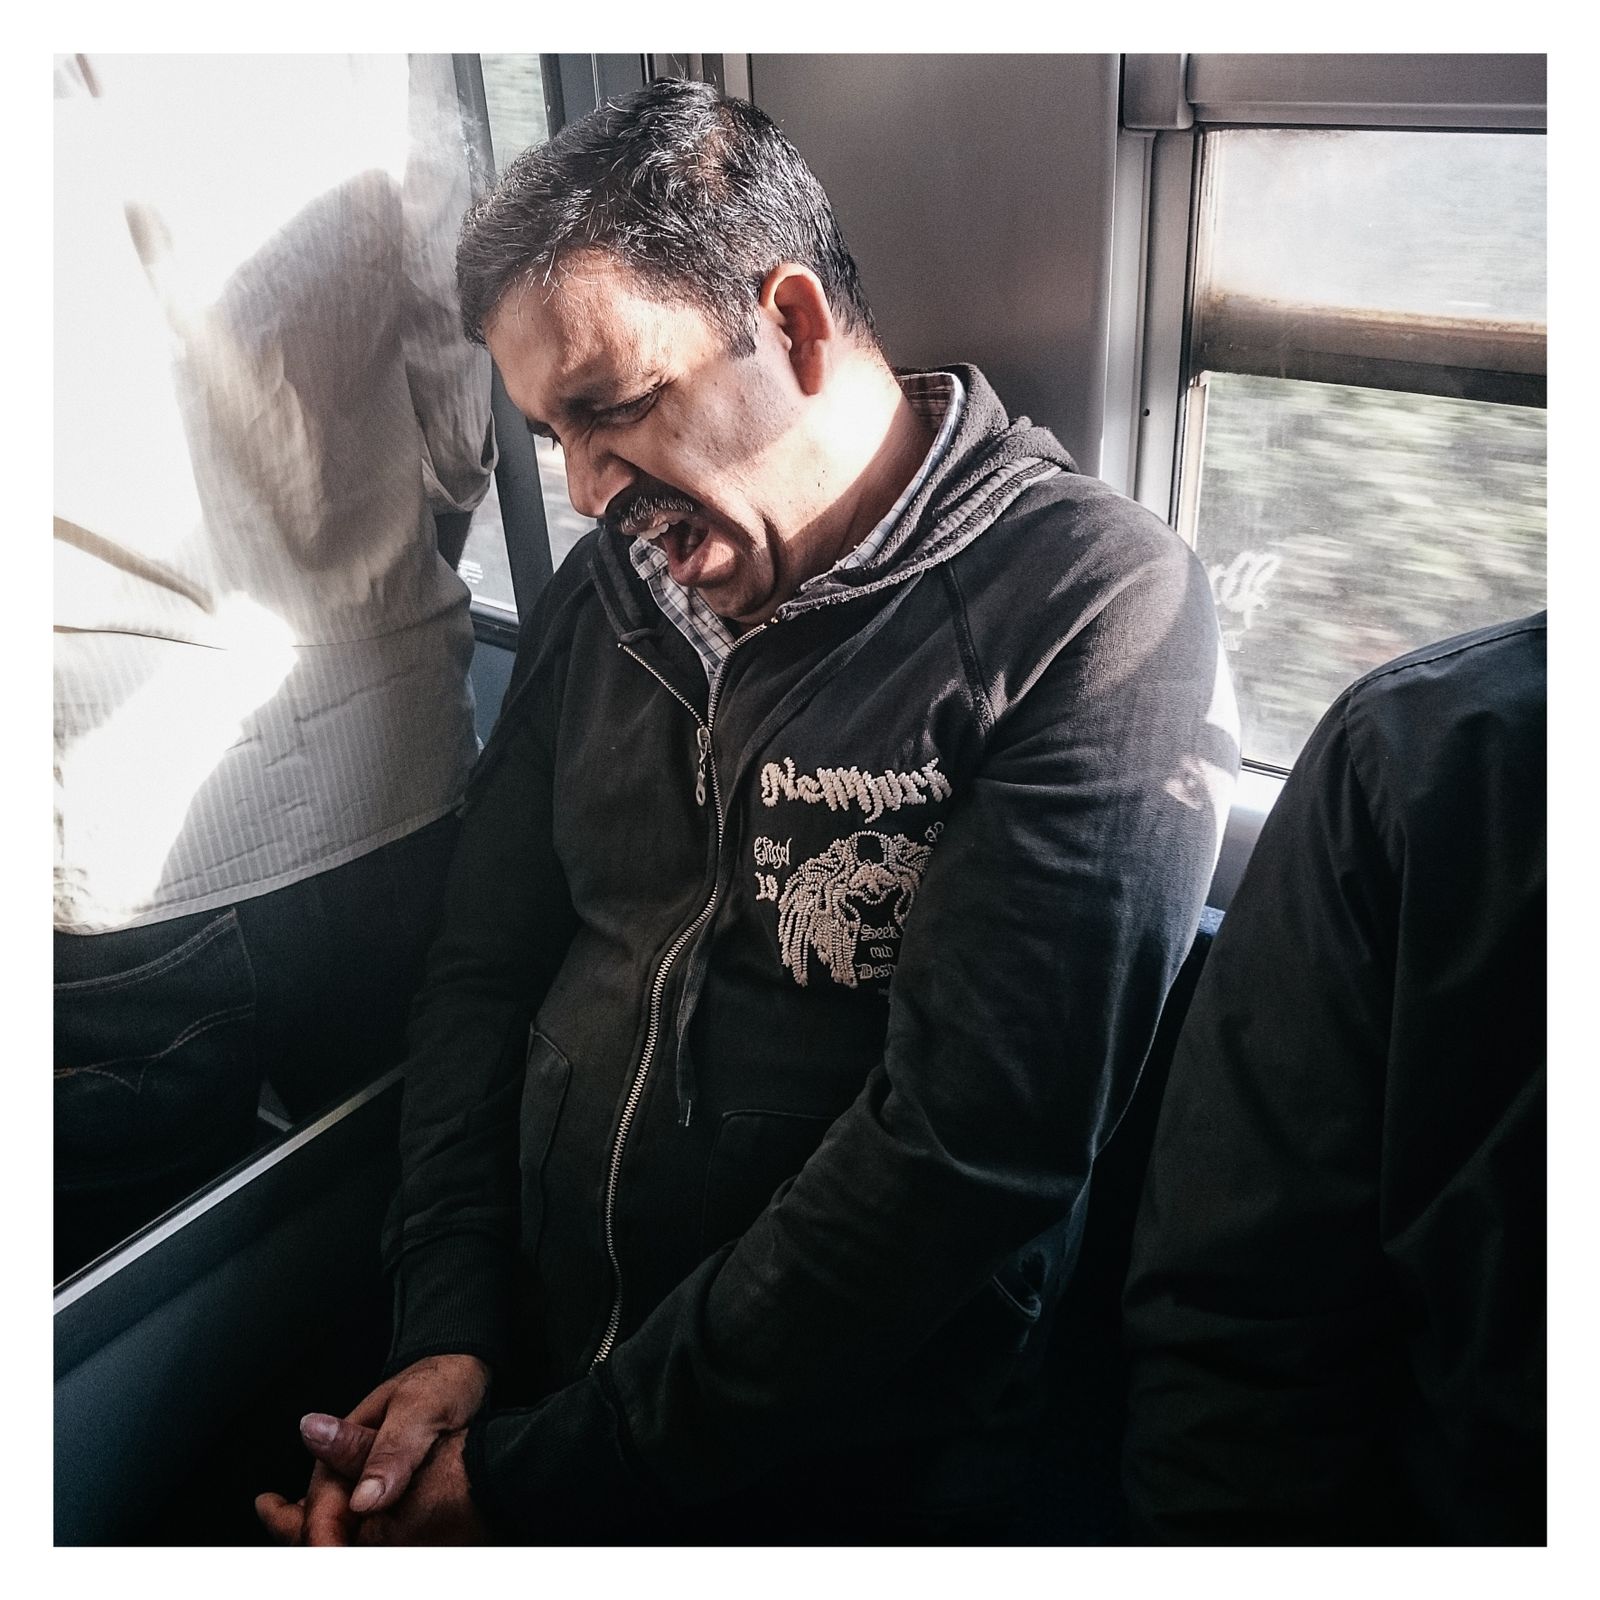 © Lorenzo Papi - Image from the The train to North Rome photography project